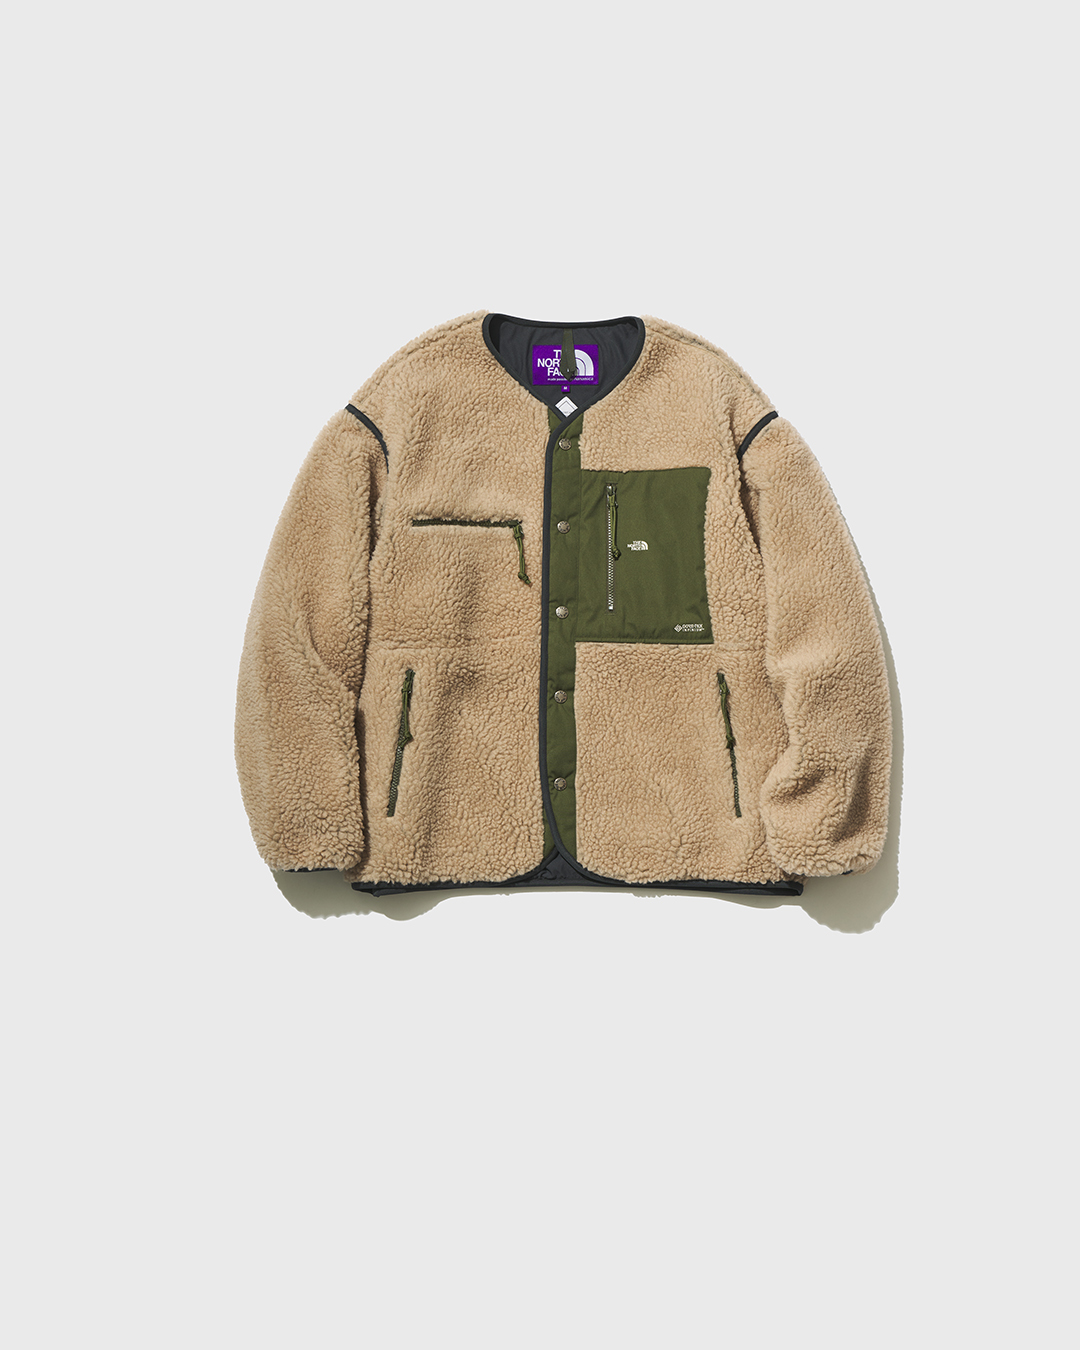 nanamica / THE NORTH FACE PURPLE LABEL / Featured Product vol.37